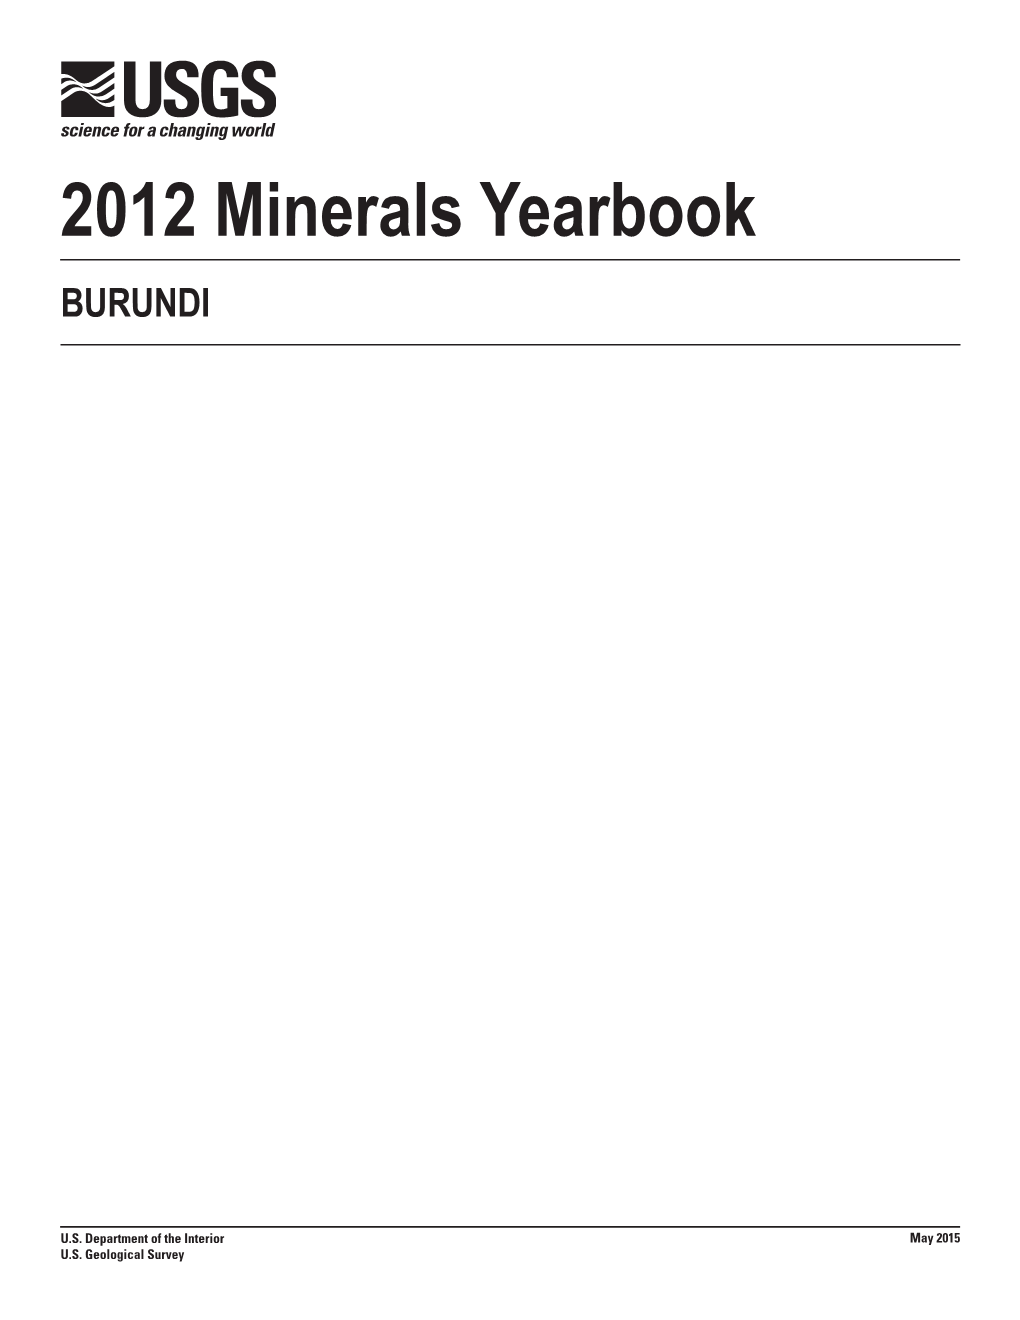 The Mineral Industry of Burundi in 2012